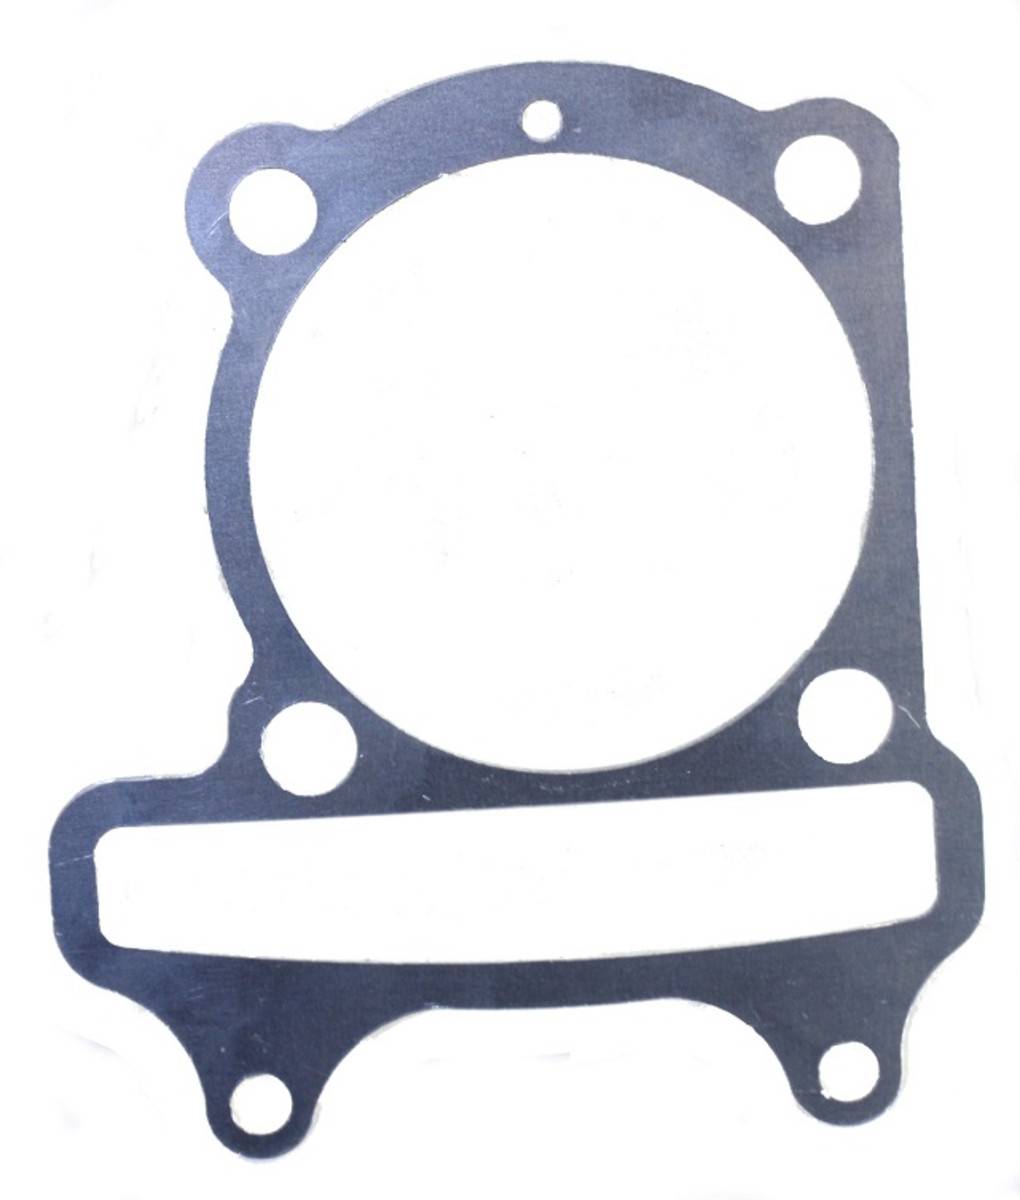 SSP-G 2mm Cylinder Spacer for GY6